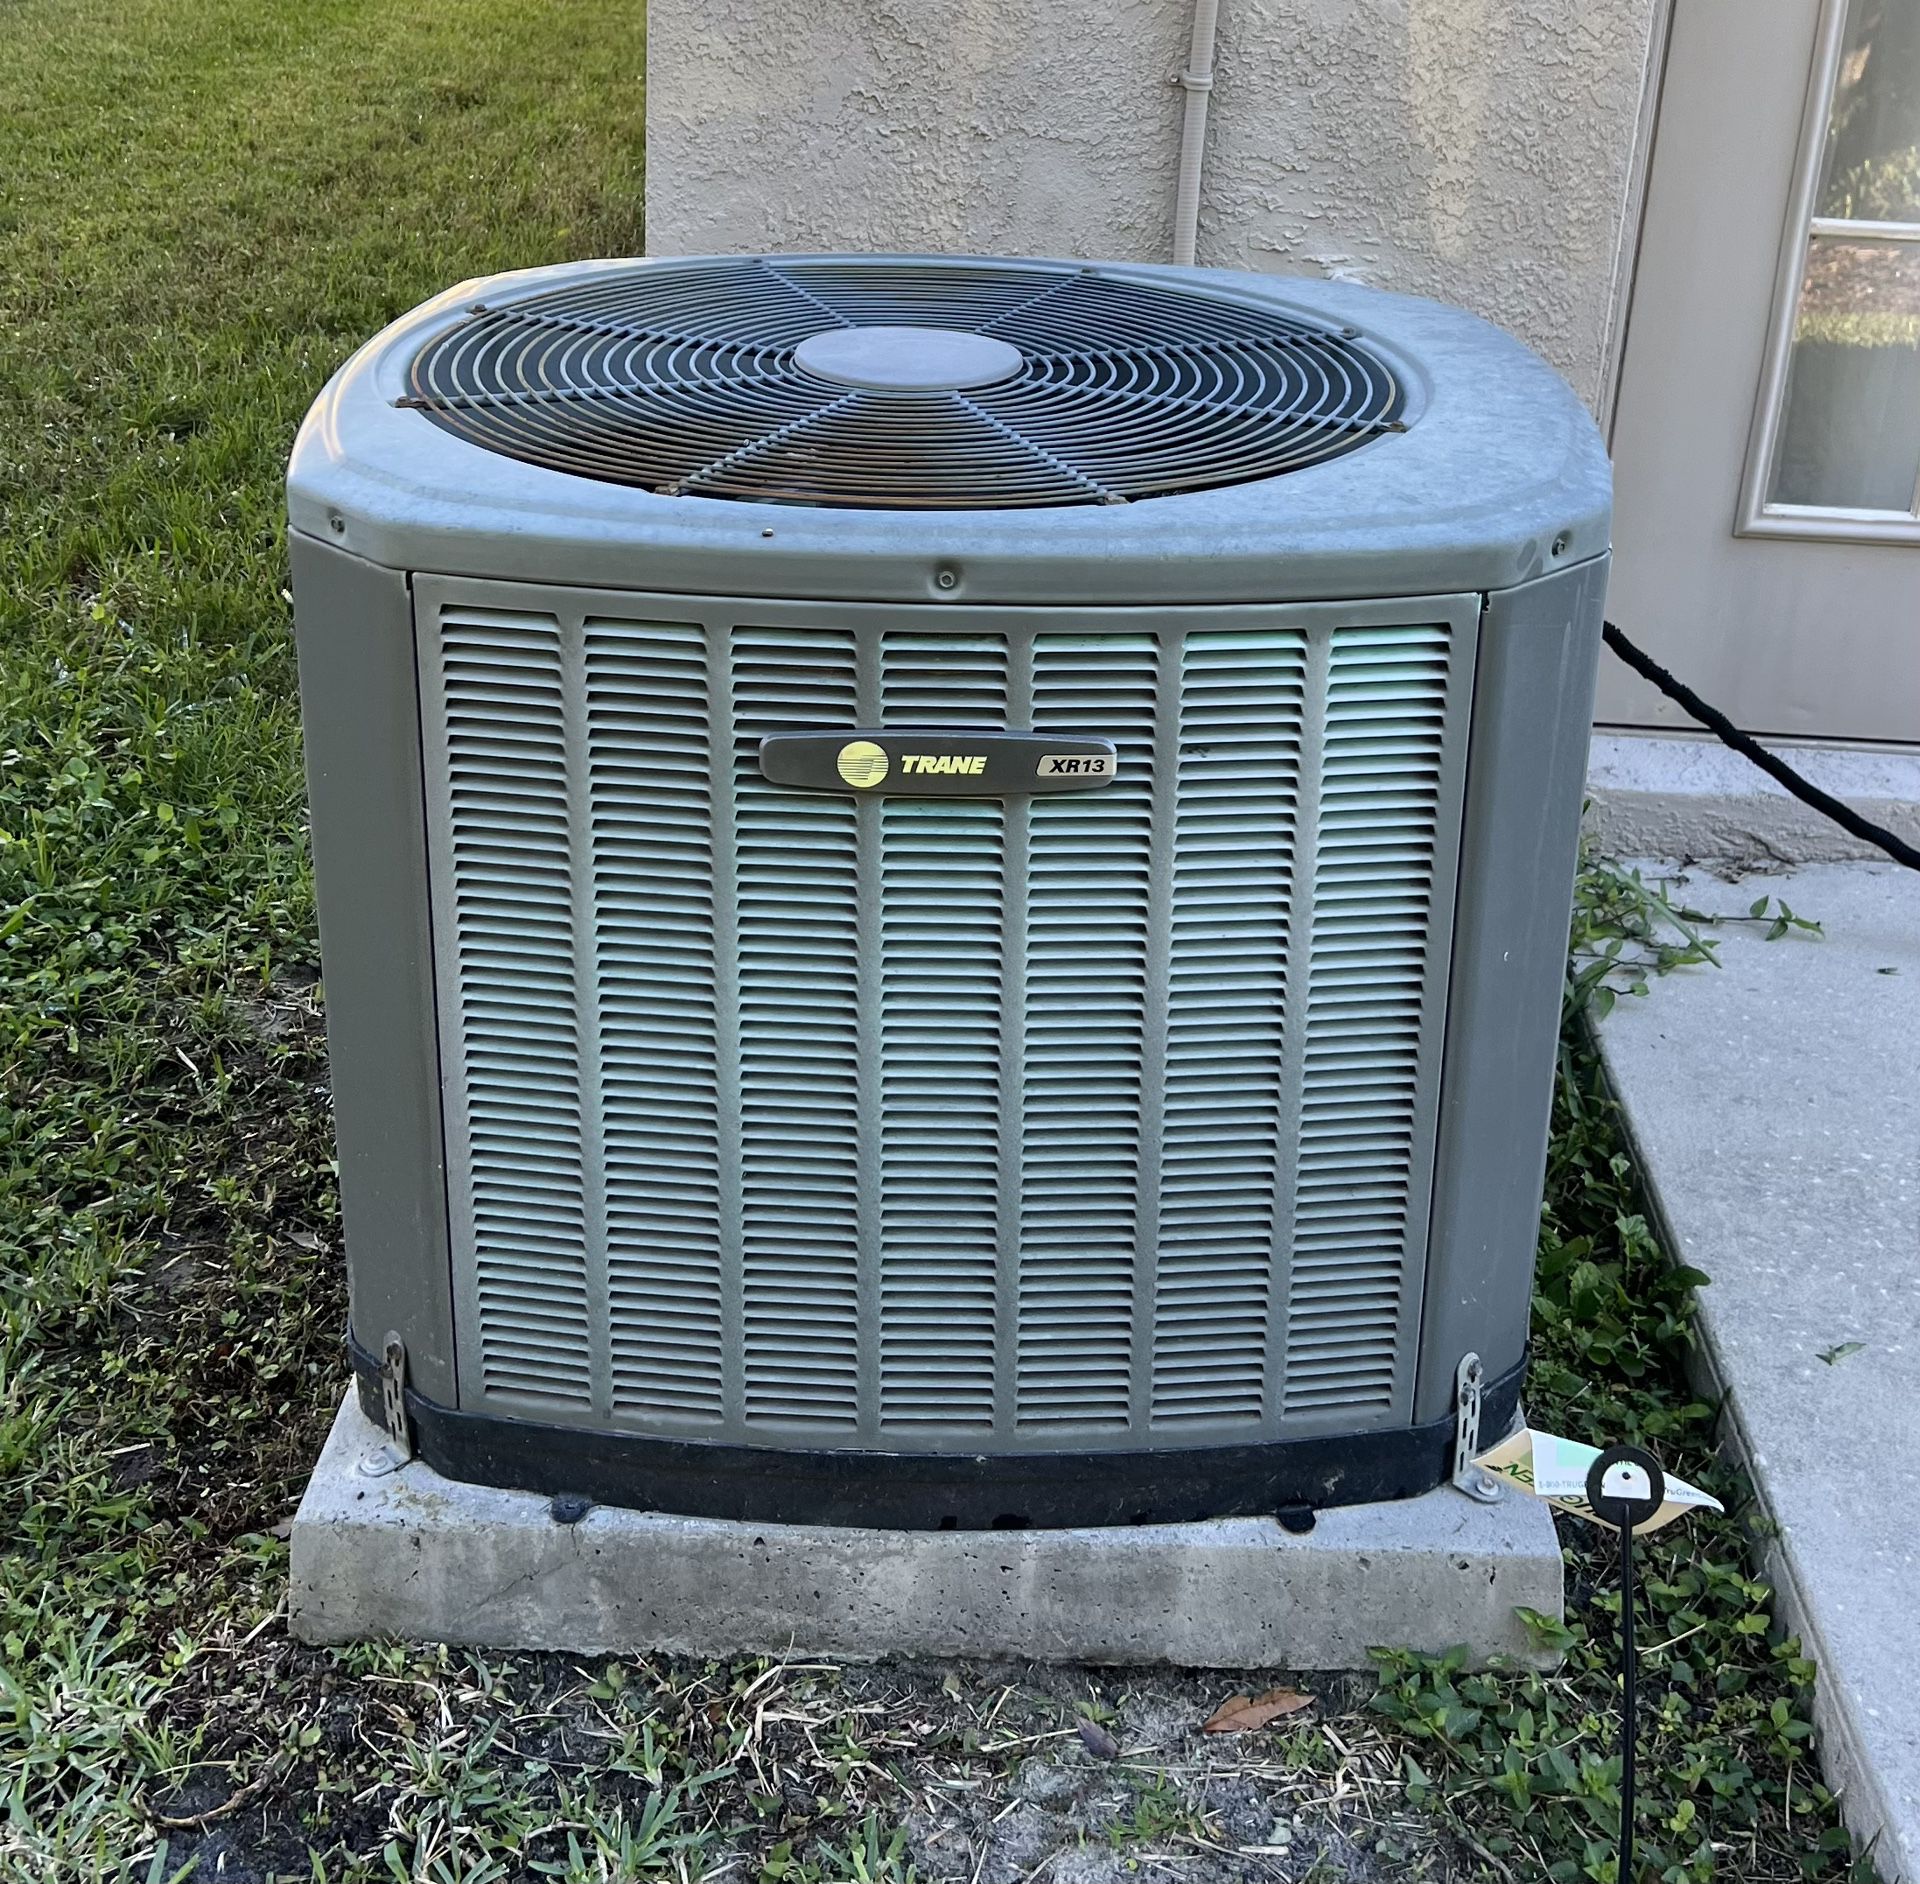 3.5 Ton Trane Air Conditioner, Works Great! Pick Up Today! 